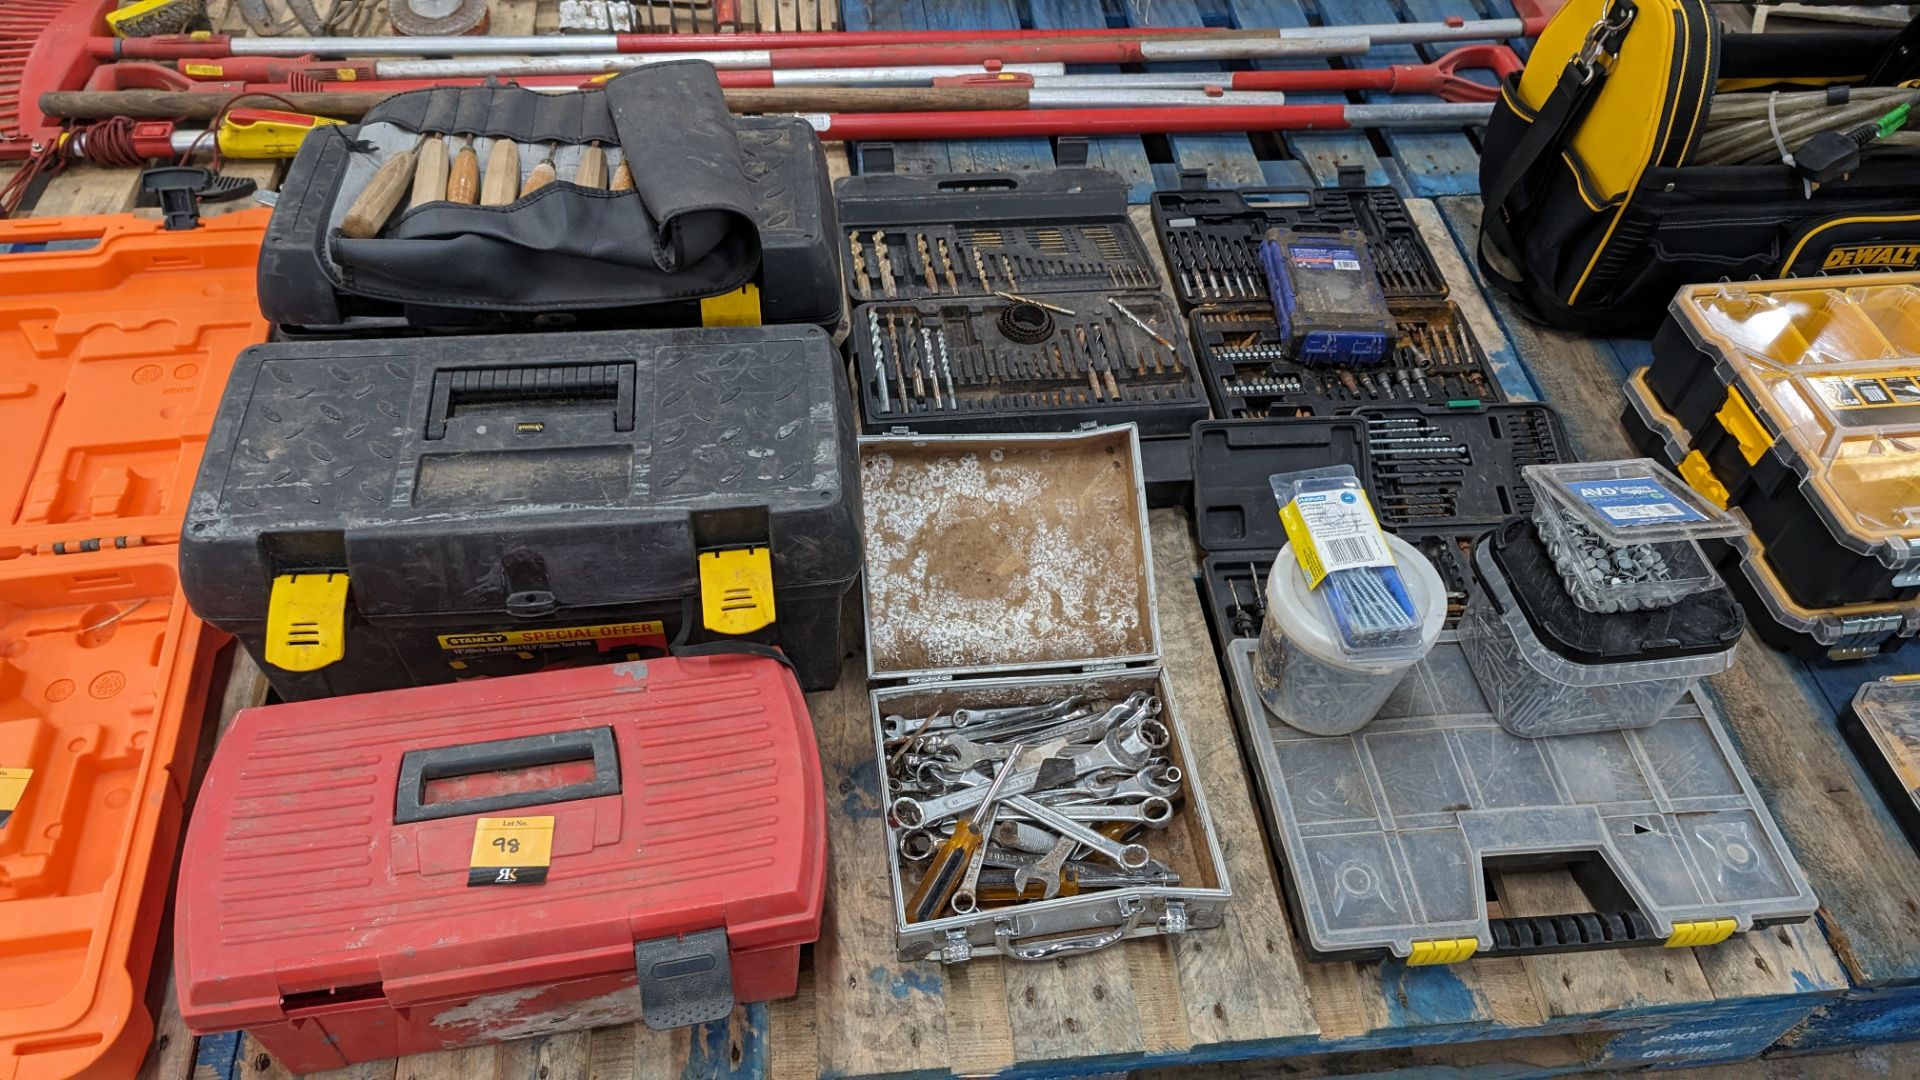 The contents of a pallet of tool kits/toolboxes & contents including good quantity of bit sets